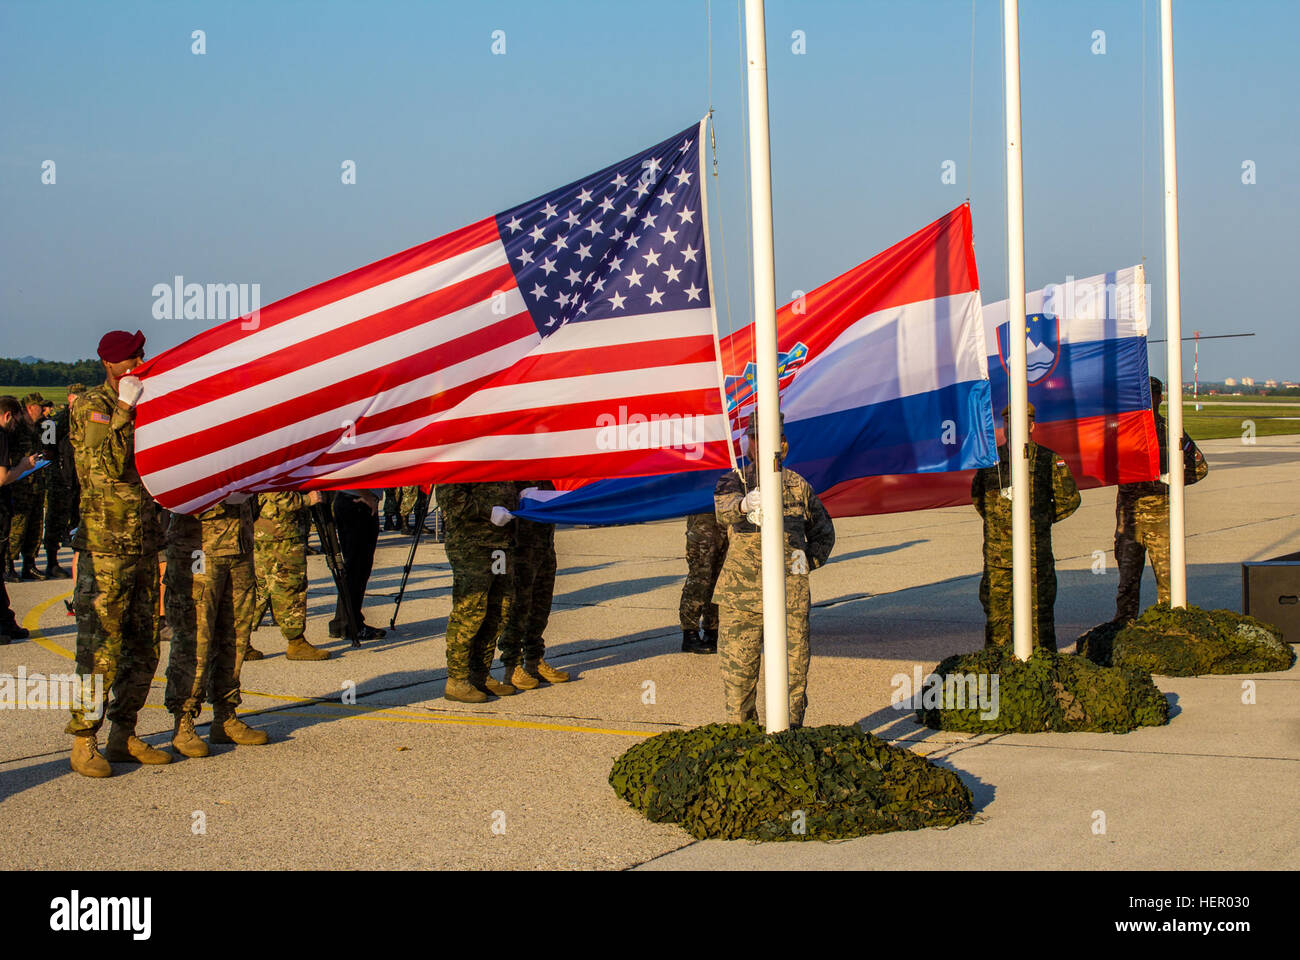 Soldiers from the United States, Croatia, and Slovenia raise the flags during the Immediate Response 16 Opening Ceremony. Immediate Response 16 is a multinational, brigade-level command post exercise utilizing computer-assisted simulations and field training exercises spanning two countries, Croatia and Slovenia. The exercises and simulations are built upon a decisive action based scenario and are designed to enhance regional stability, strengthen Allied and partner nation capacity, and improve interoperability among partner nations. The exercise will occur Sept. 9-23, 2016, and will include m Stock Photo